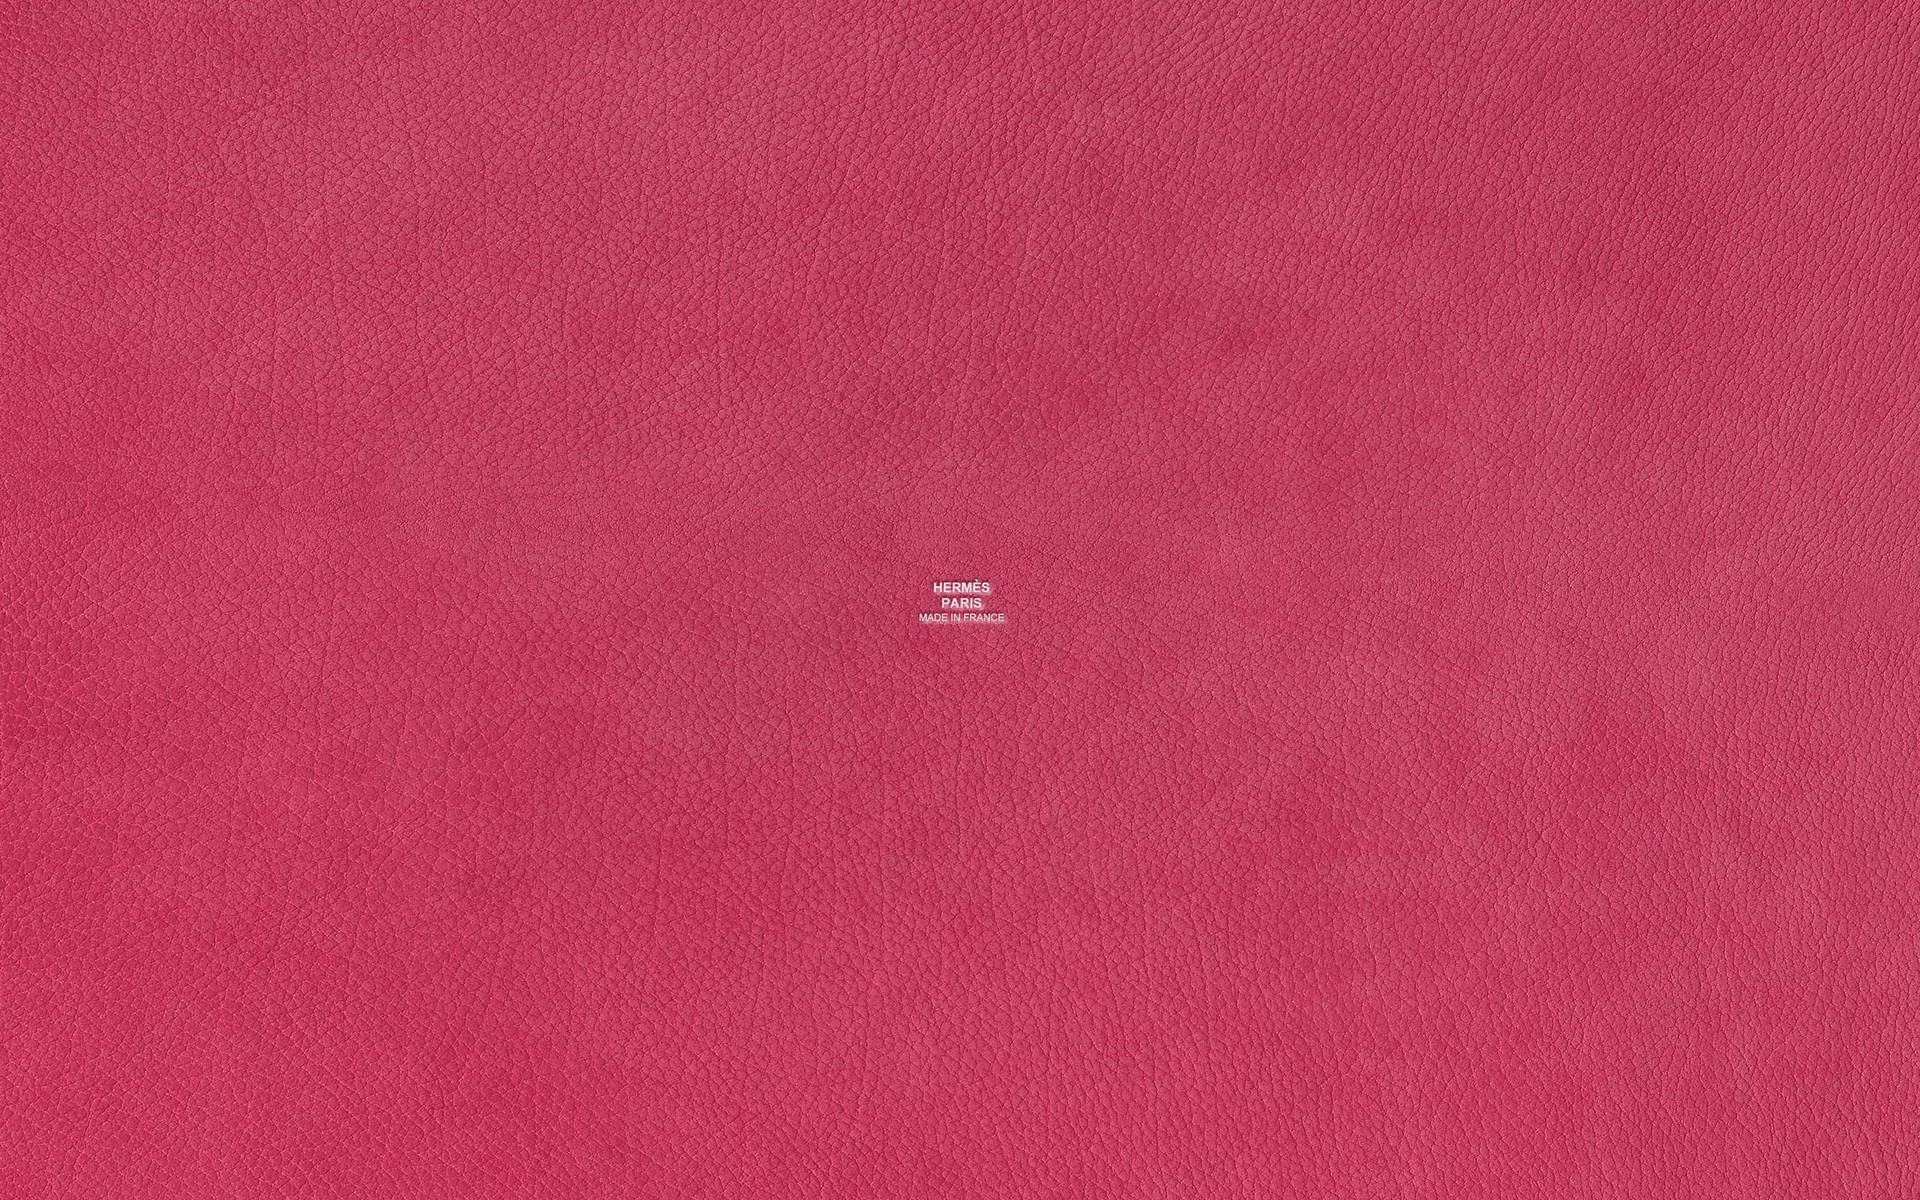 Bright Pink Textured Hermes Leather Wallpaper